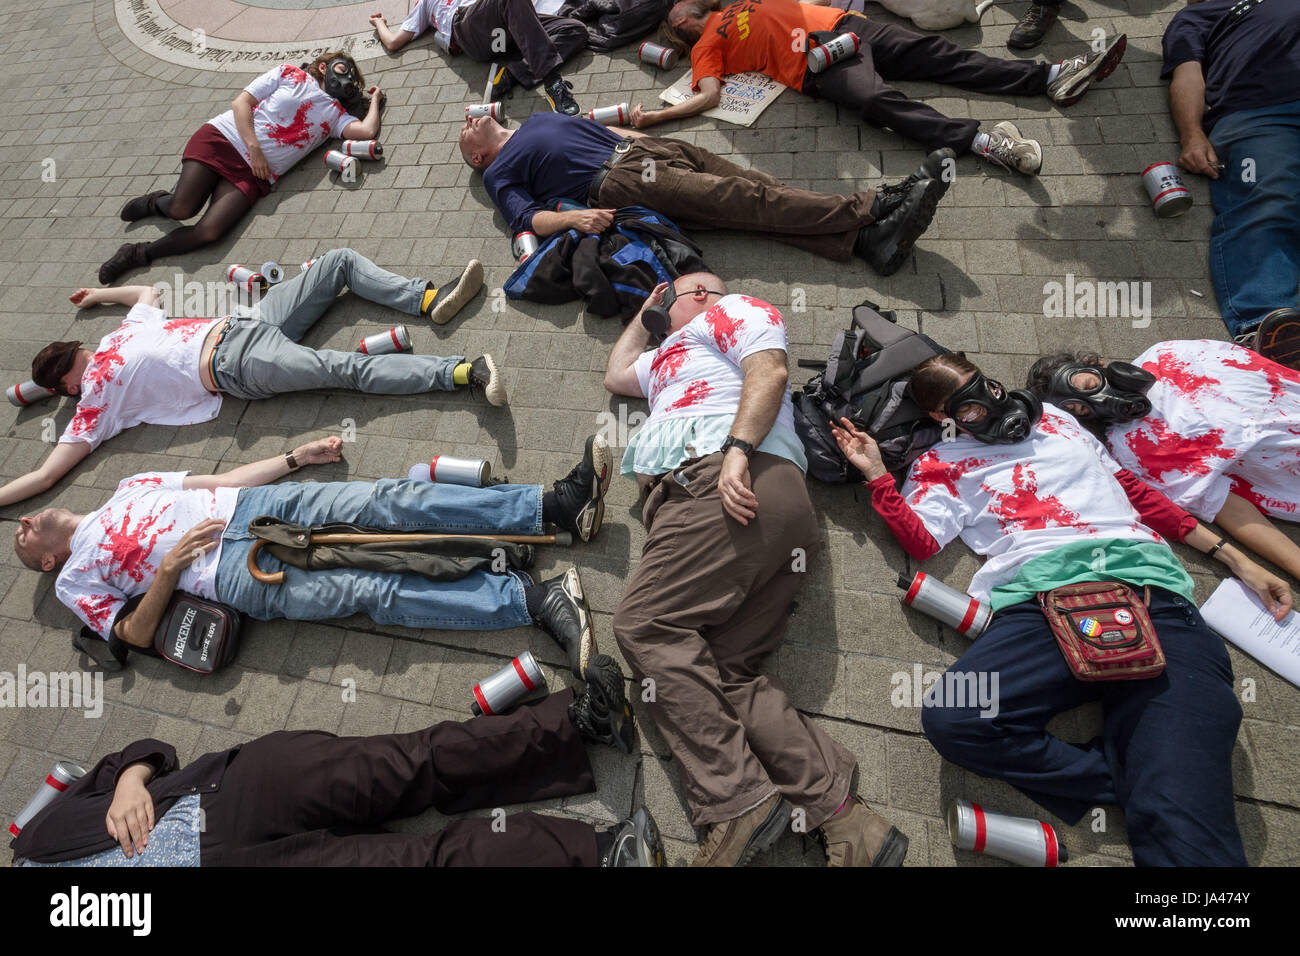 Demonstrators stage a ‘die-in’ protest. Stop the Arms Fair. Anti-war protesters outside Parliament Buildings in London, UK. Stock Photo